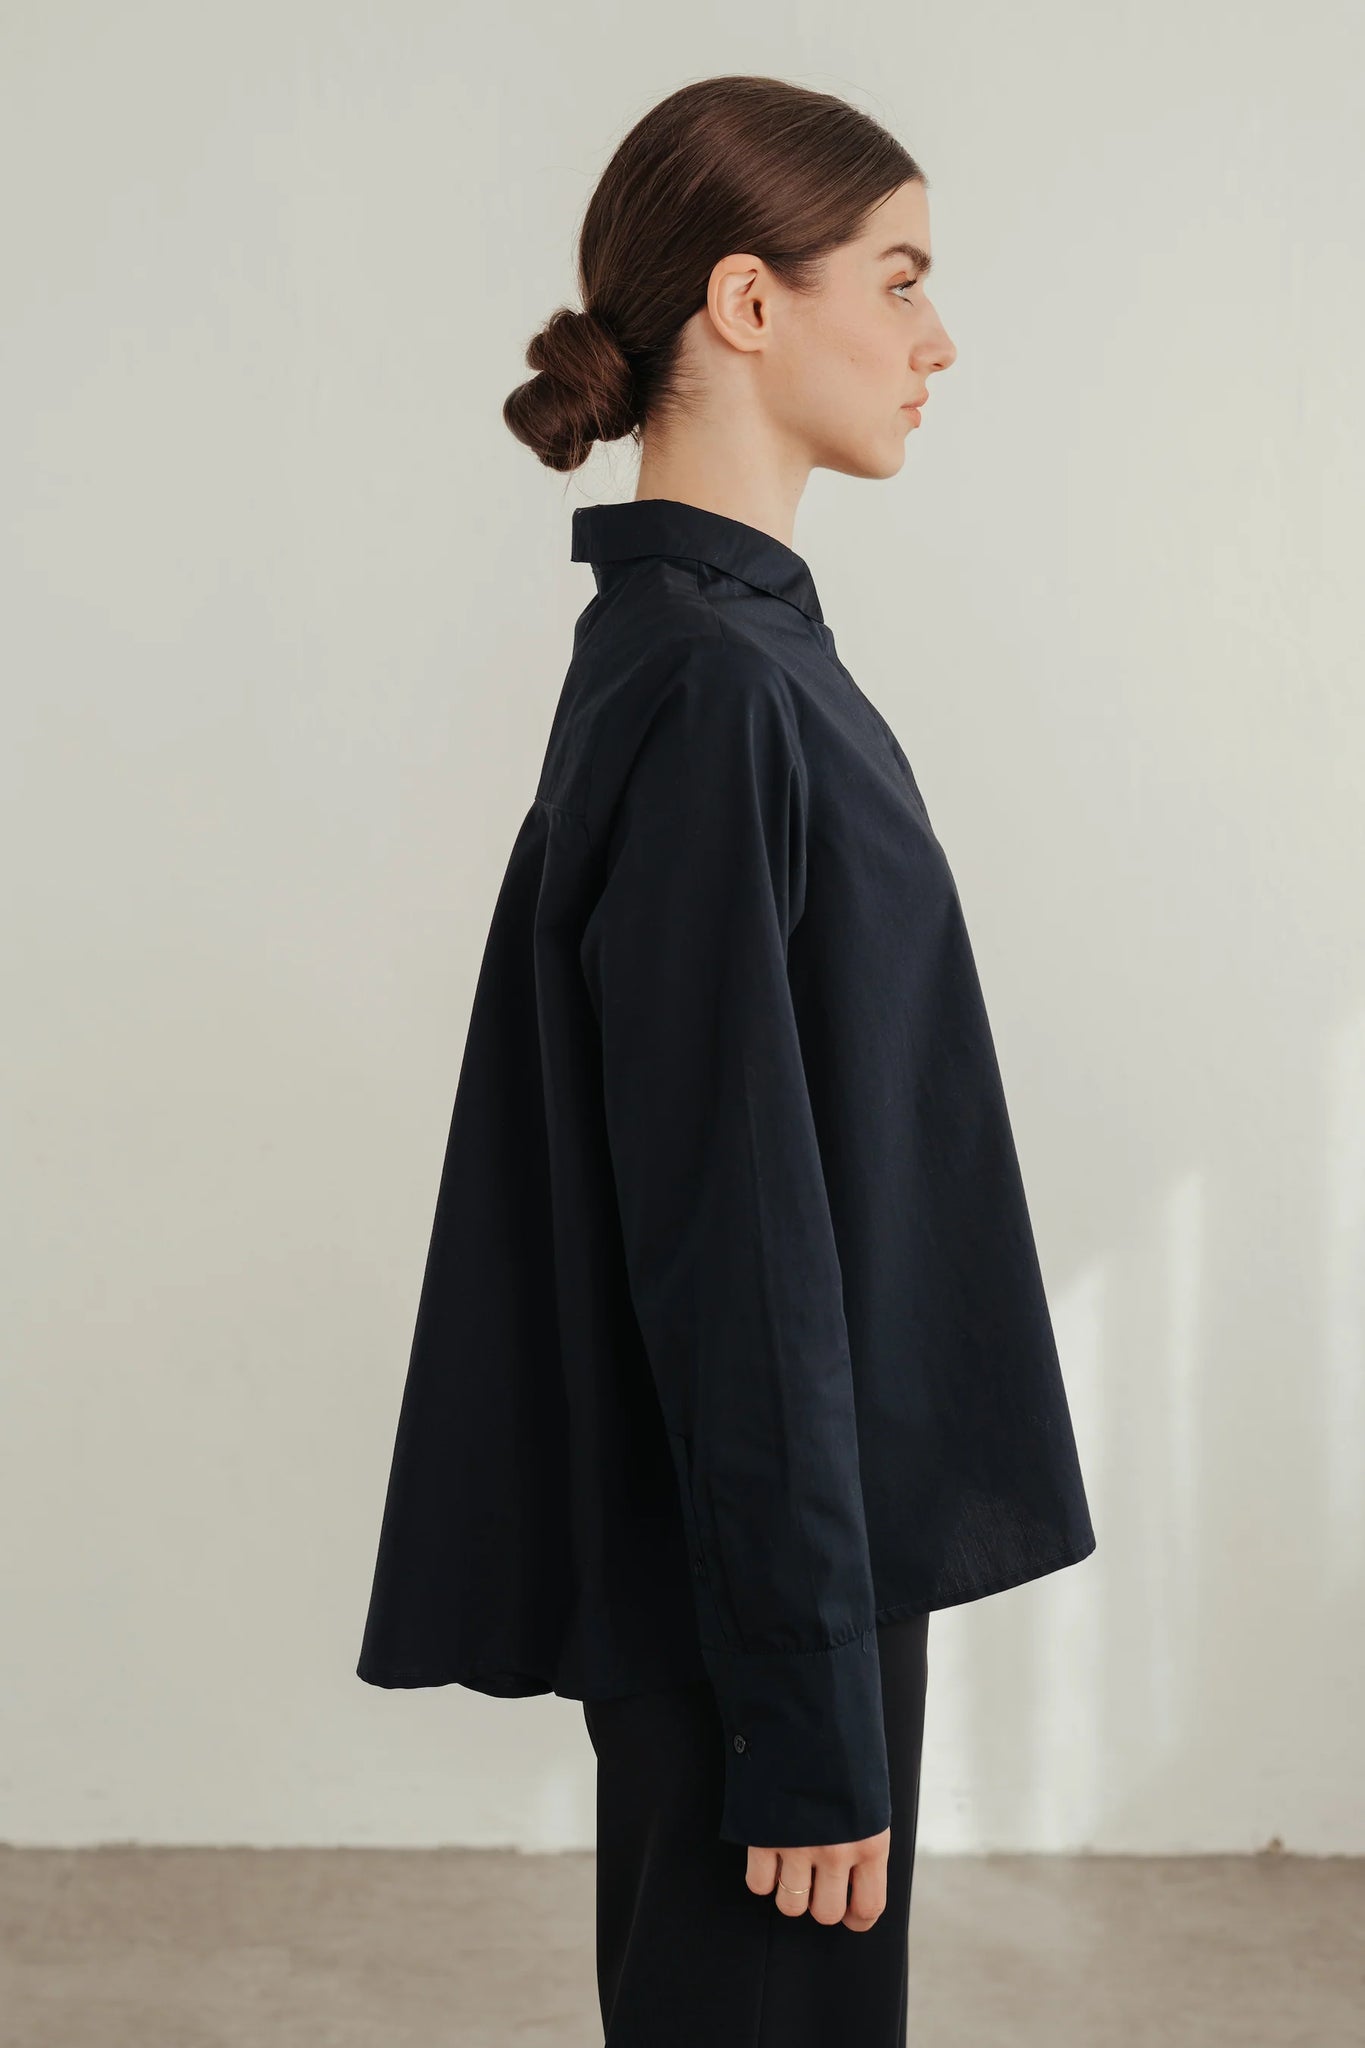 Fitted shirt with wavy back in night sky by sonho stories